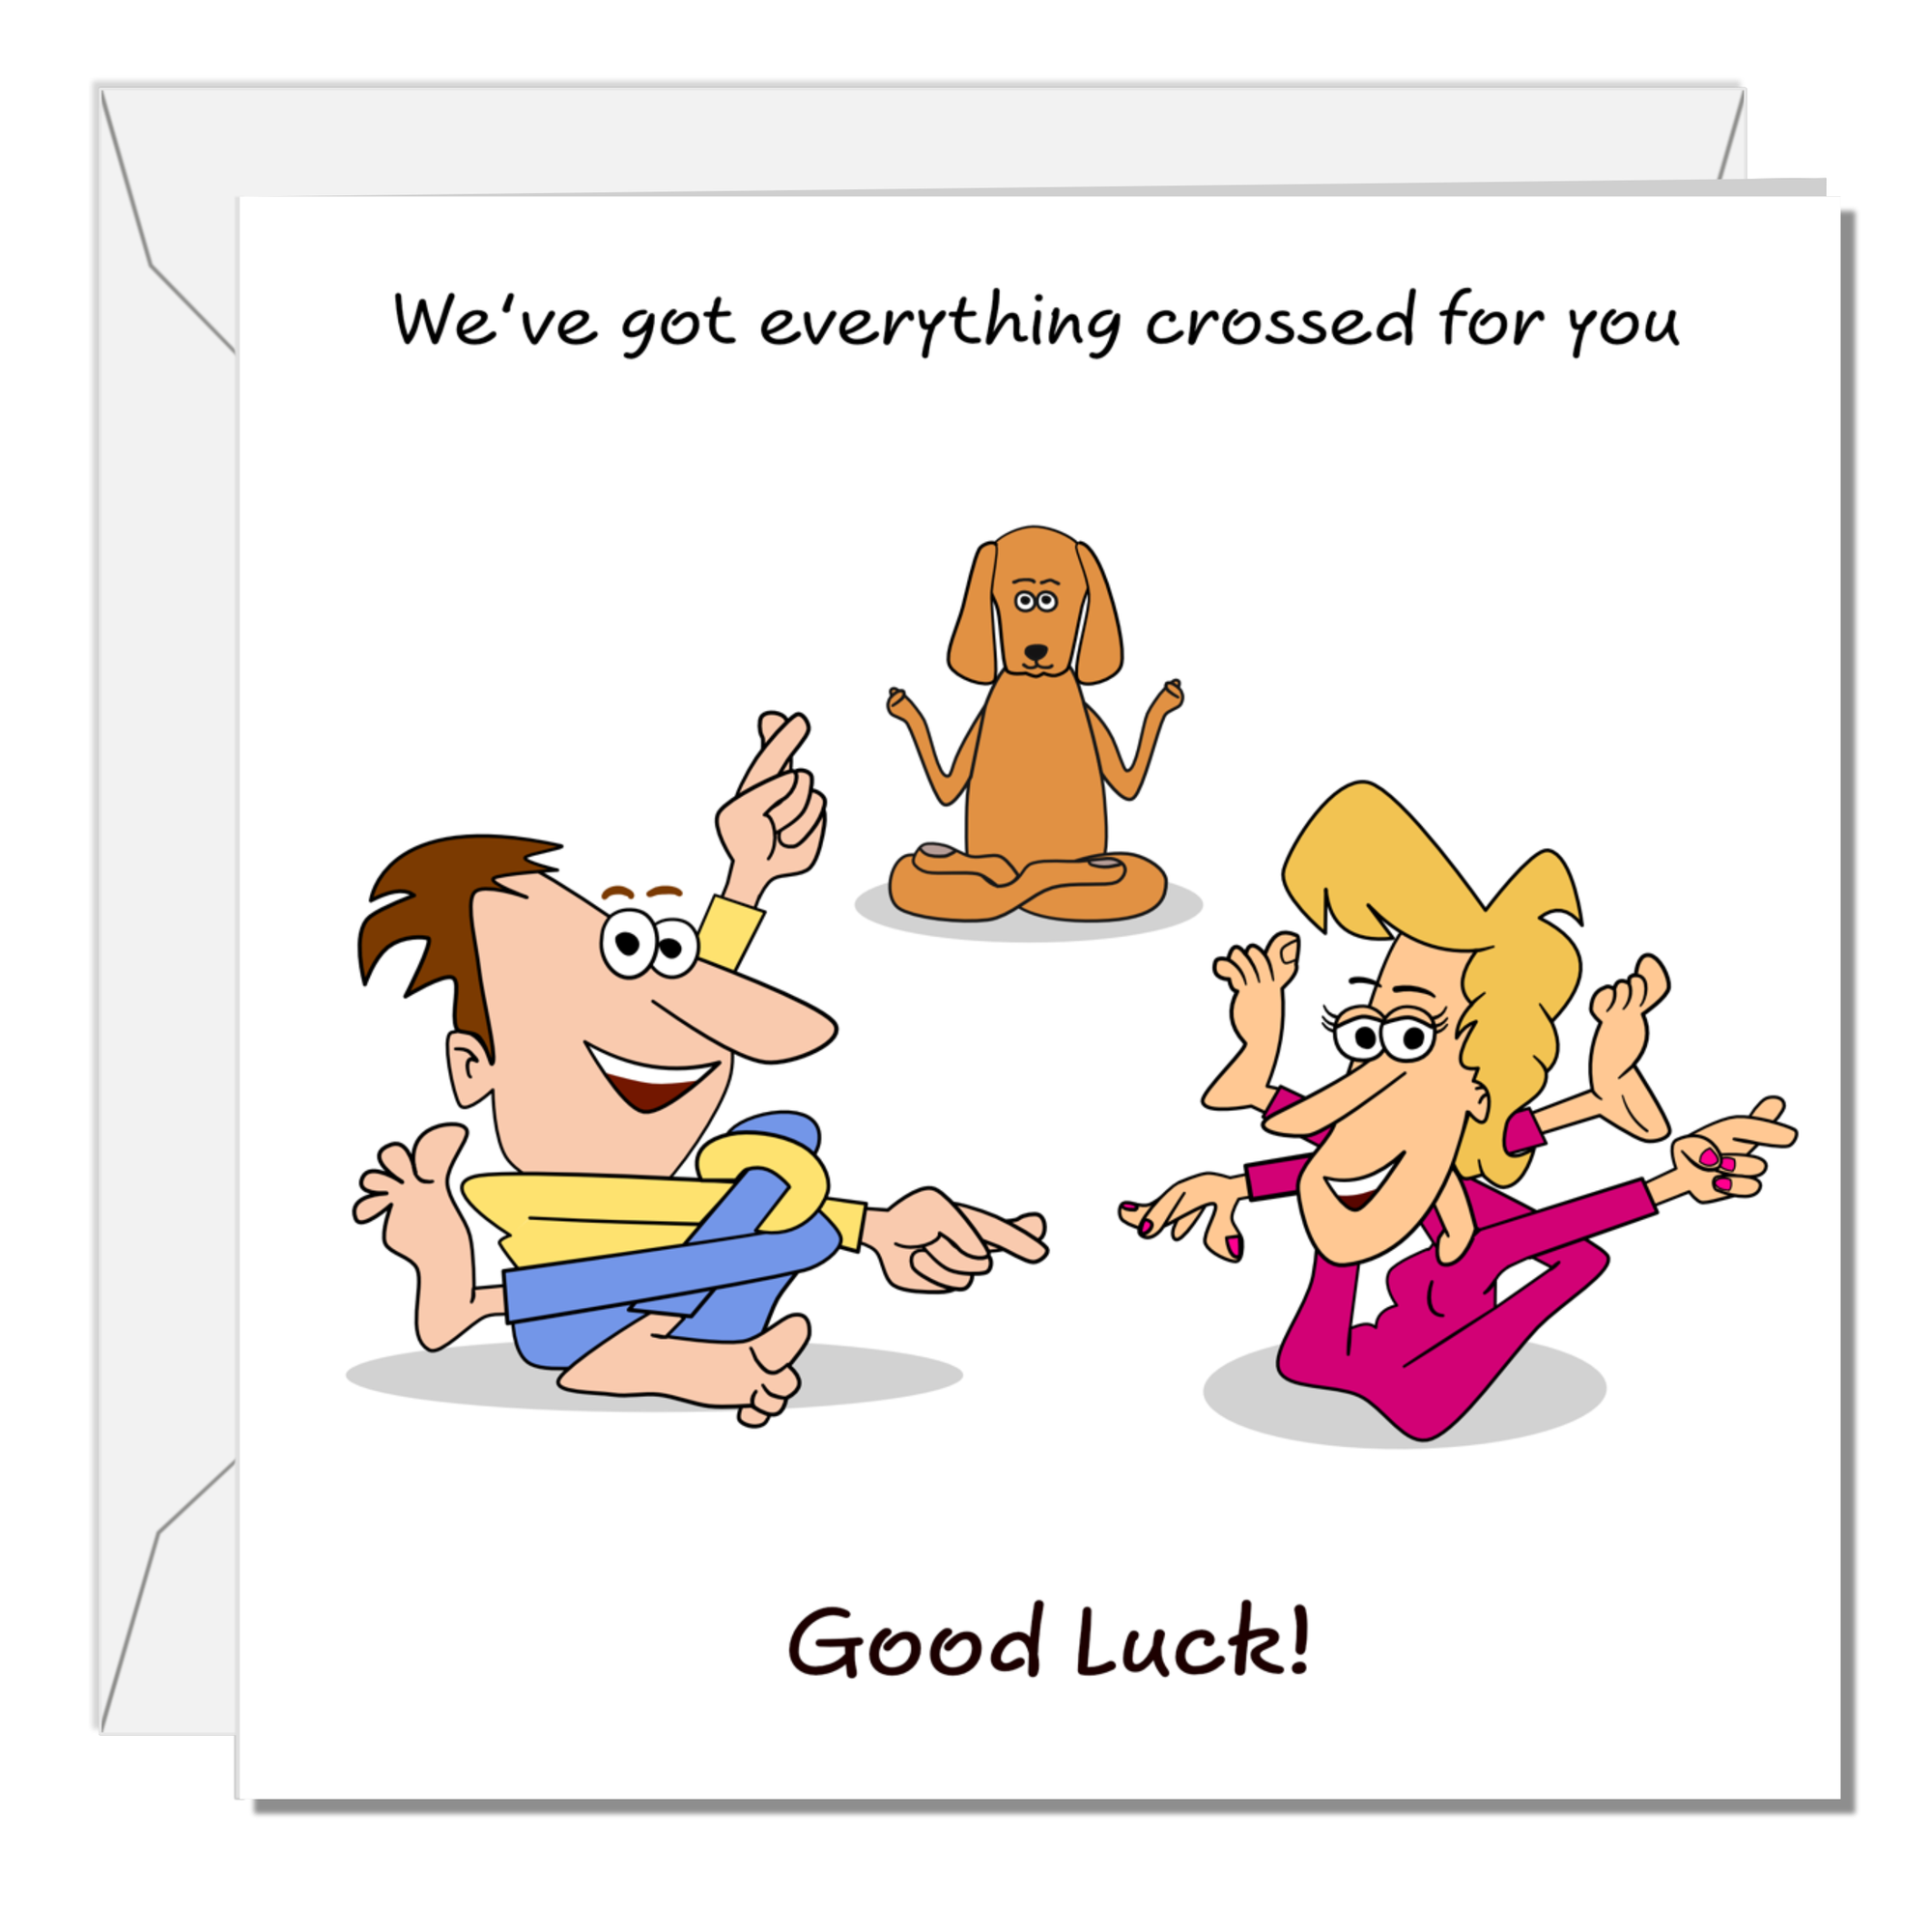 Funny Good Luck Card for Exams Driving Test New Job Challenge University GCSE O Levels Accountancy Bar Law Graduation Swizzoo